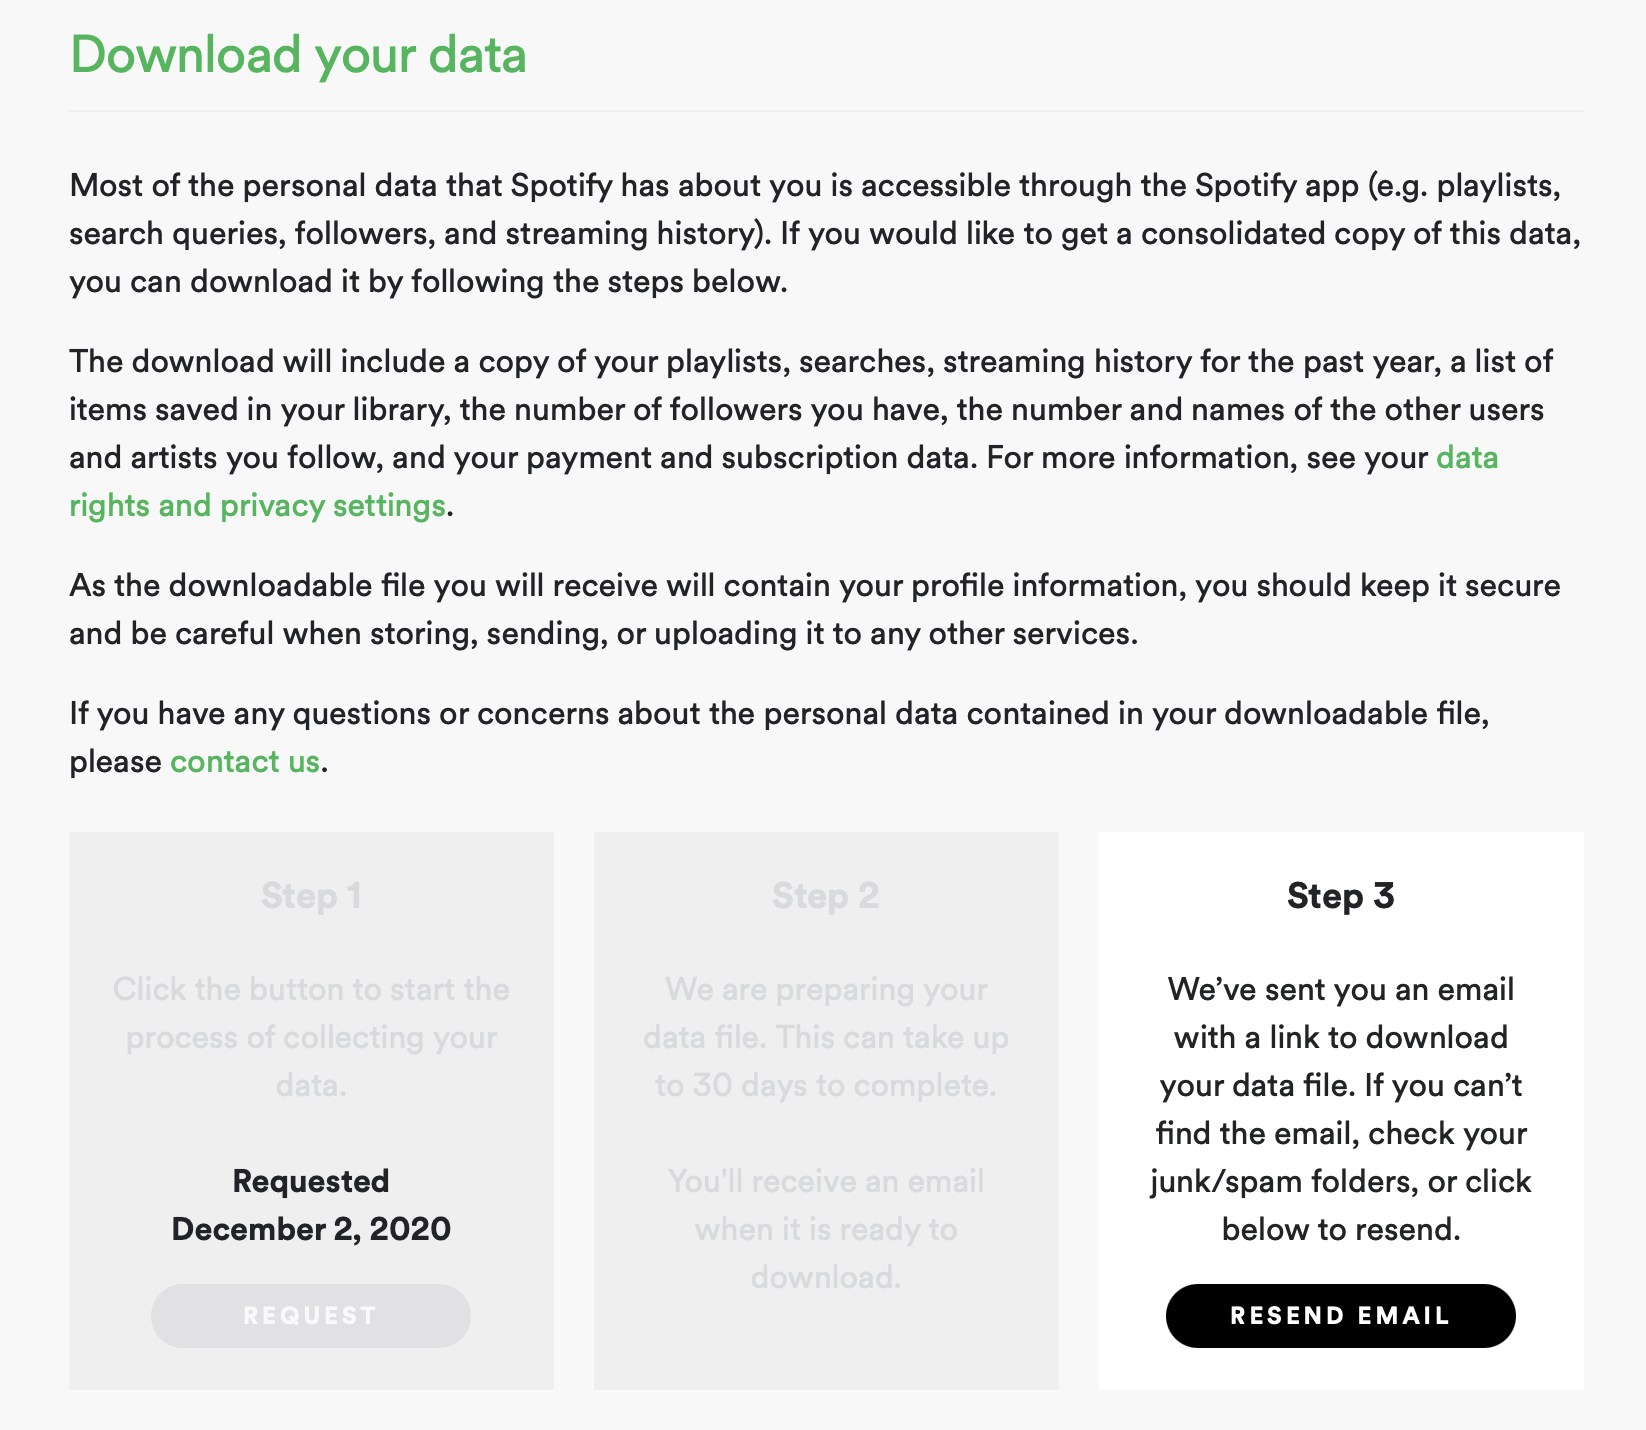 How to download your personal data from the Spotify website.